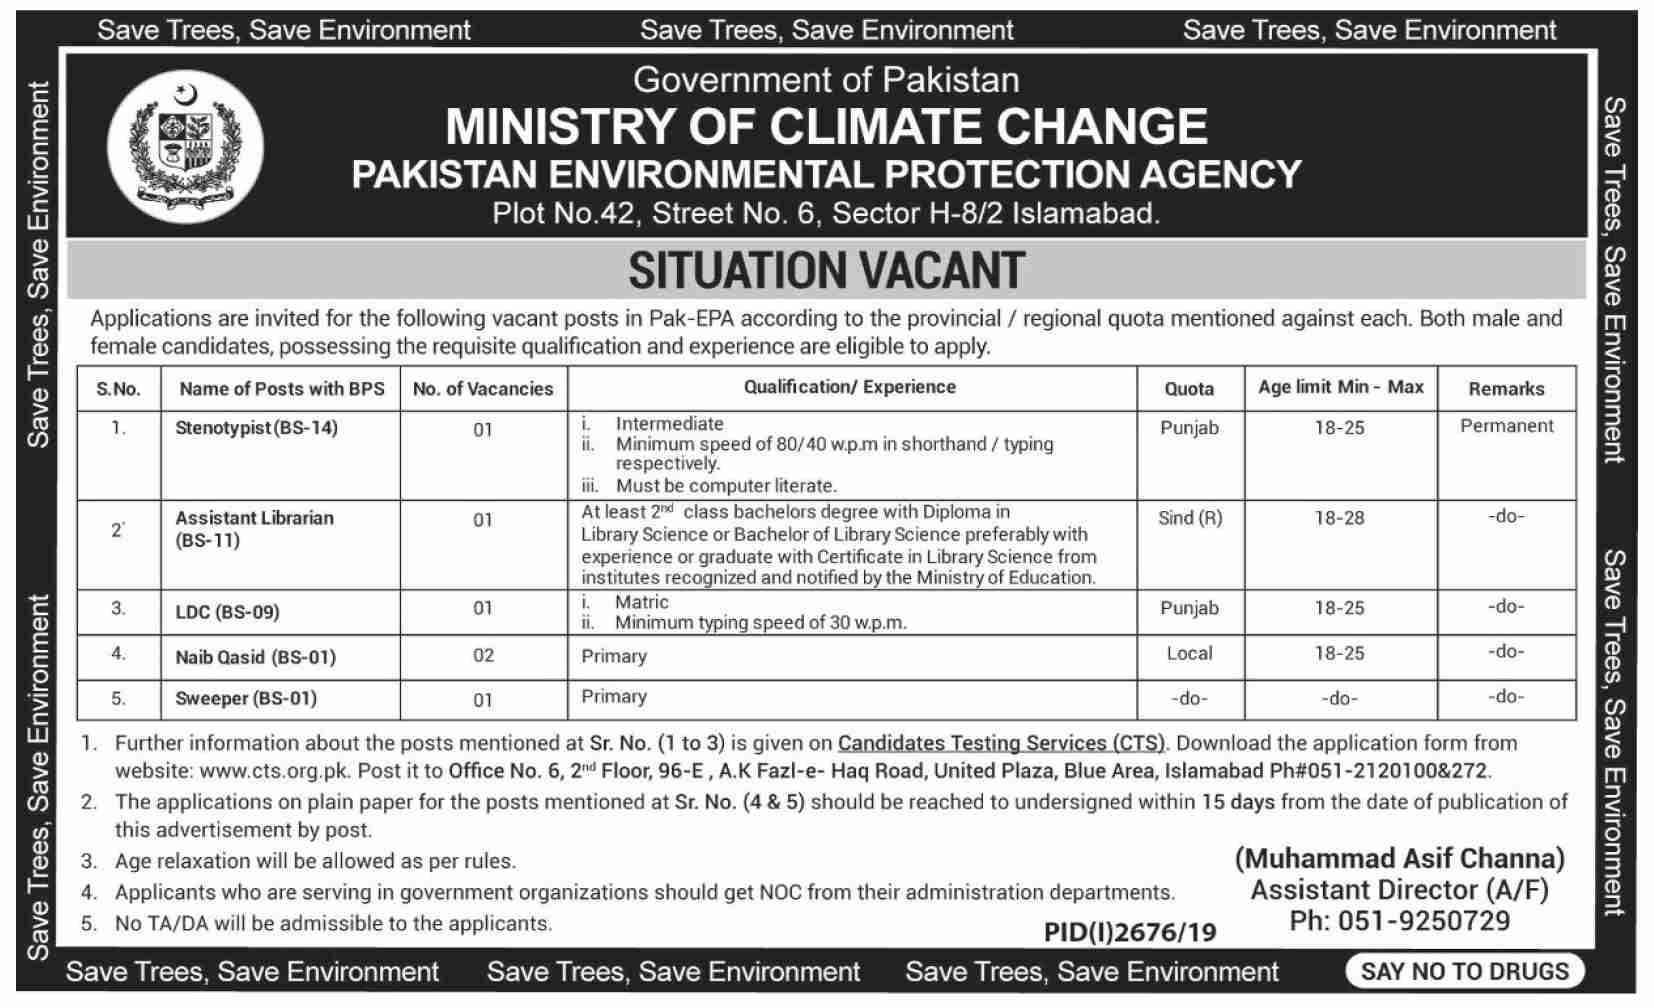 Steno Typist,Assistant Librarian,Lower Division Clerk Jobs In Pakistan Environmental Protection Agency Islamabad